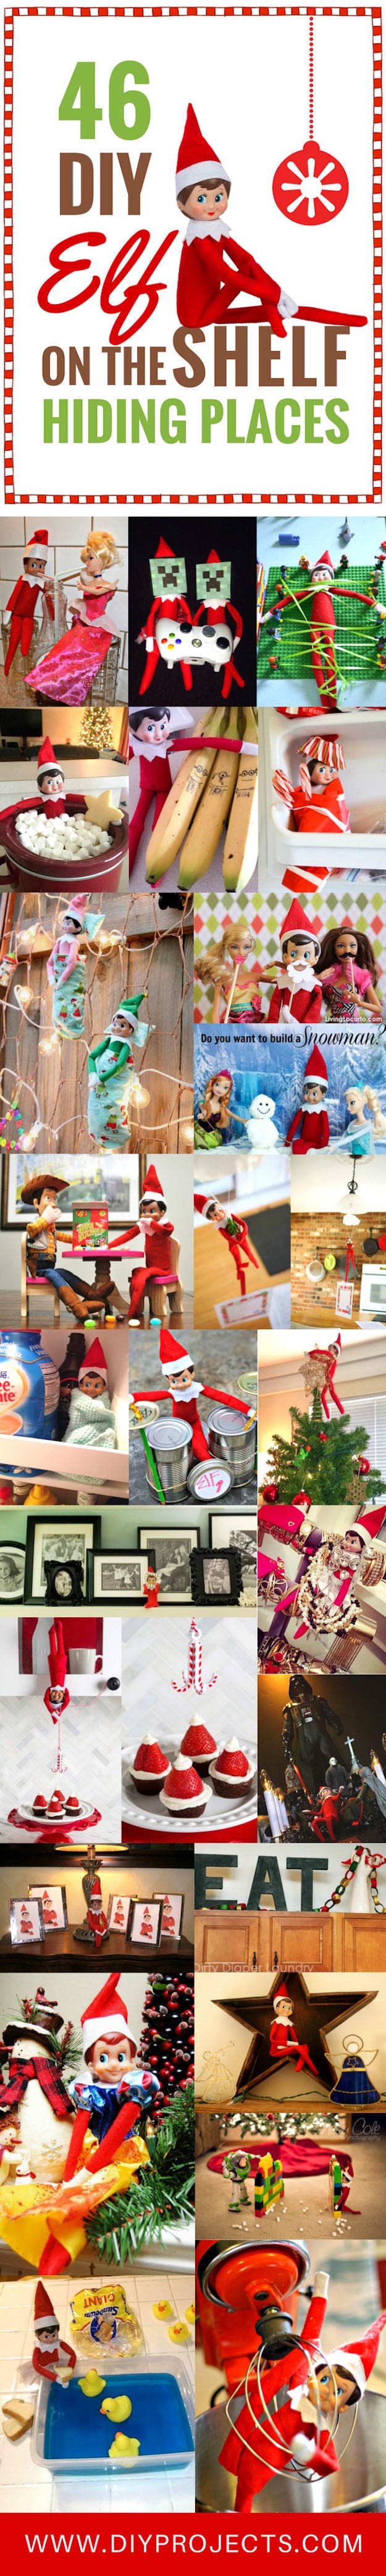 46 DIY Elf on the Shelf Hiding Places | Hide your Elf on the Shelf all around the house in fun and silly places. Every morning your child wakes up to a new Elf on the Shelf adventure! See all 46 on https://diyprojects.com/diy-elf-on-the-shelf-hiding-places/